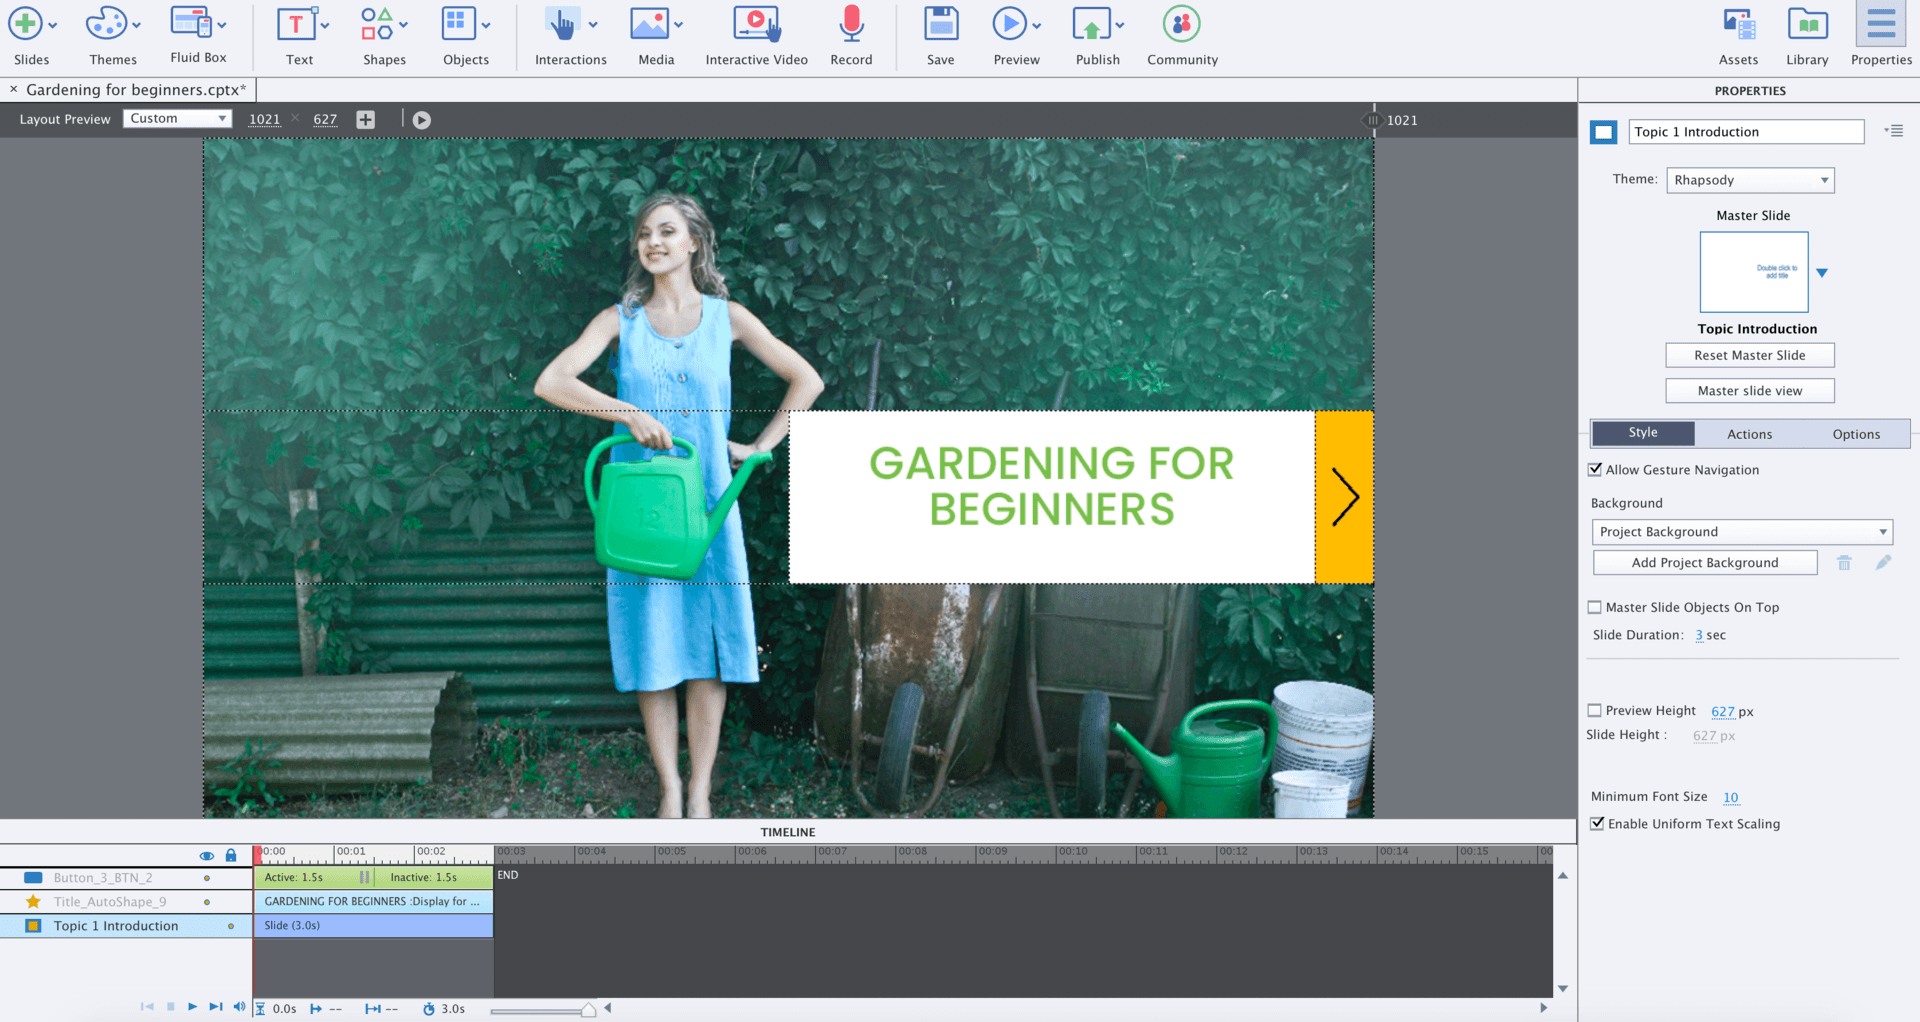 Adobe Captivate edit mode showing gardening course cover page